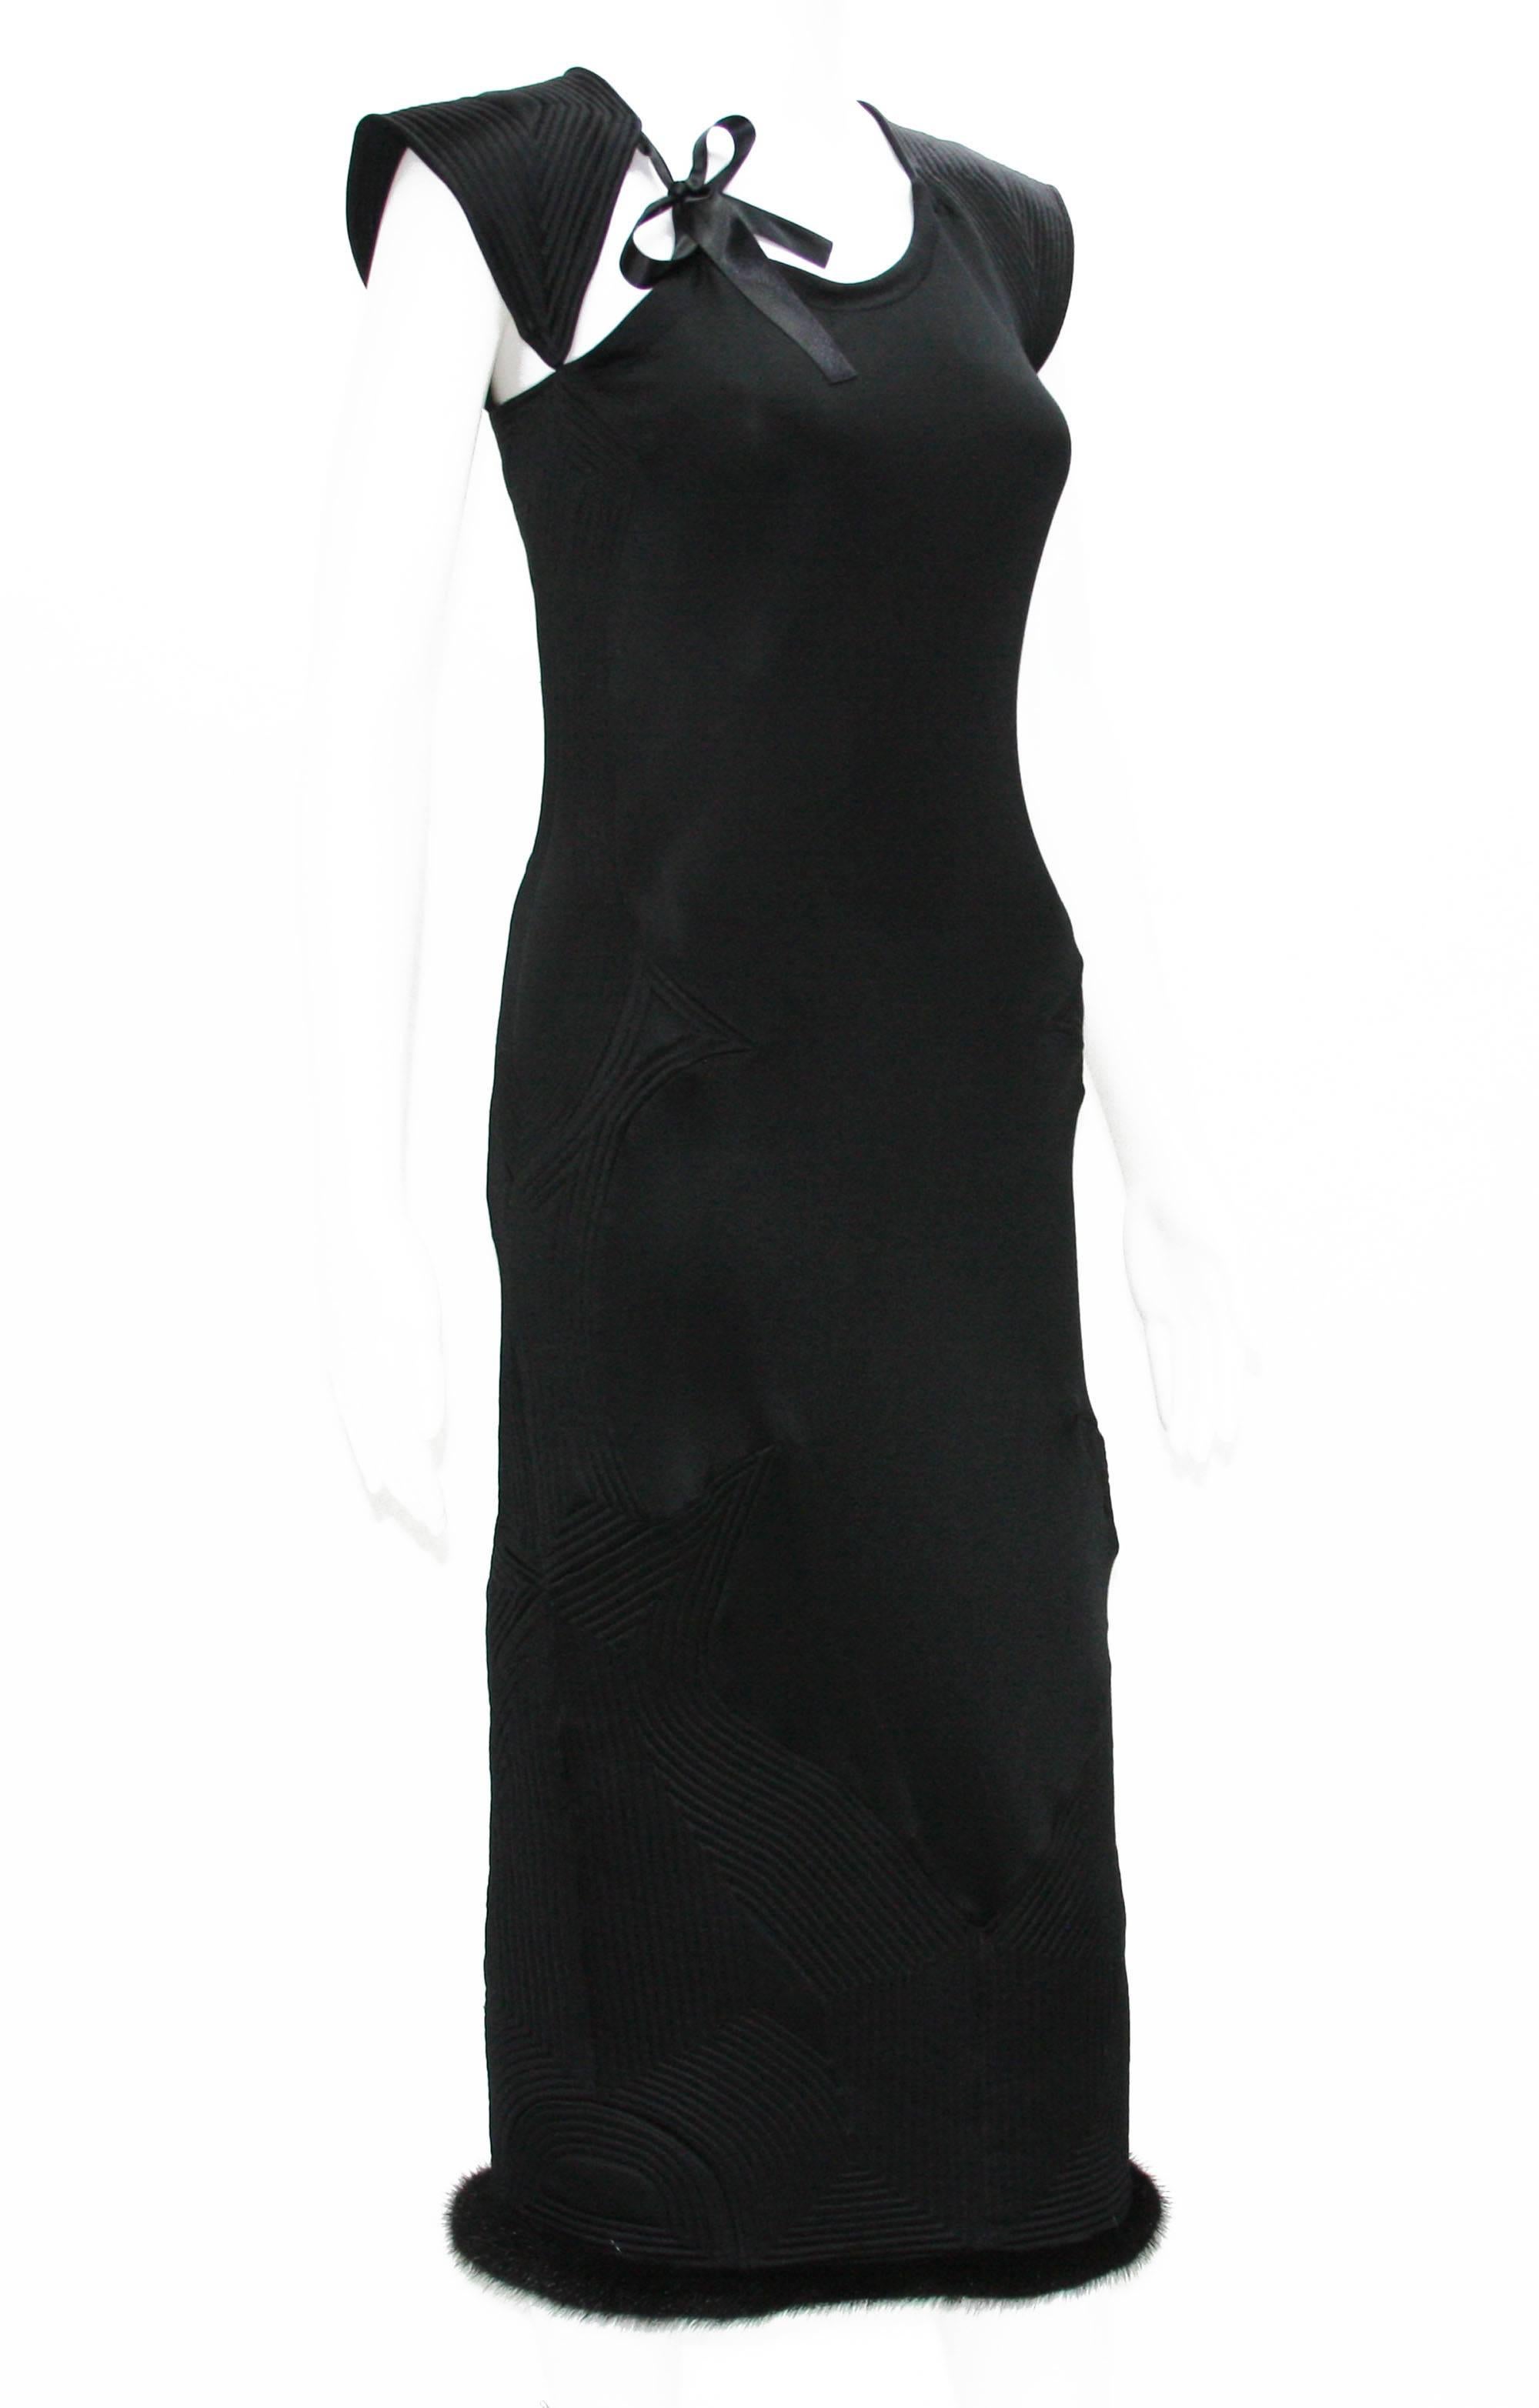 COLLECTIBLE 
TOM FORD for YVES SAINT LAURENT 
BLACK STRETCH DRESS
FALL/WINTER 2004 COLLECTION
DESIGNER SIZE – M
COLOR – BLACK

BOW ACCENTS AT NECKLINE
MINK FUR TRIM AT HEMLINE
ZIP CLOSURE ON SIDE
MADE IN ITALY
PRE-OWNED IN EXCELLENT